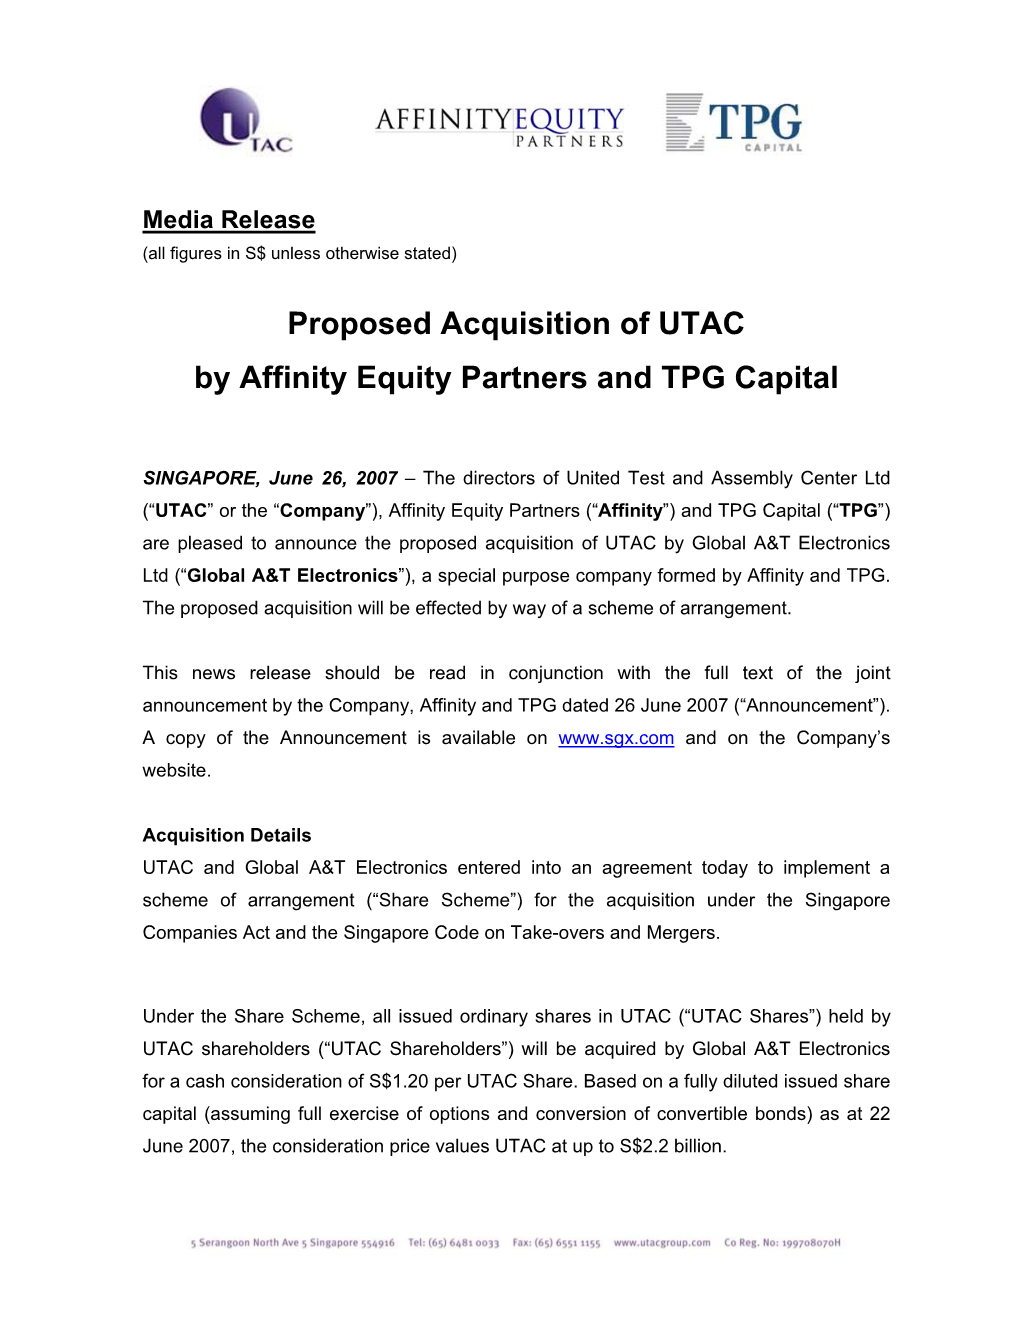 Proposed Acquisition of UTAC by Affinity Equity Partners and TPG Capital